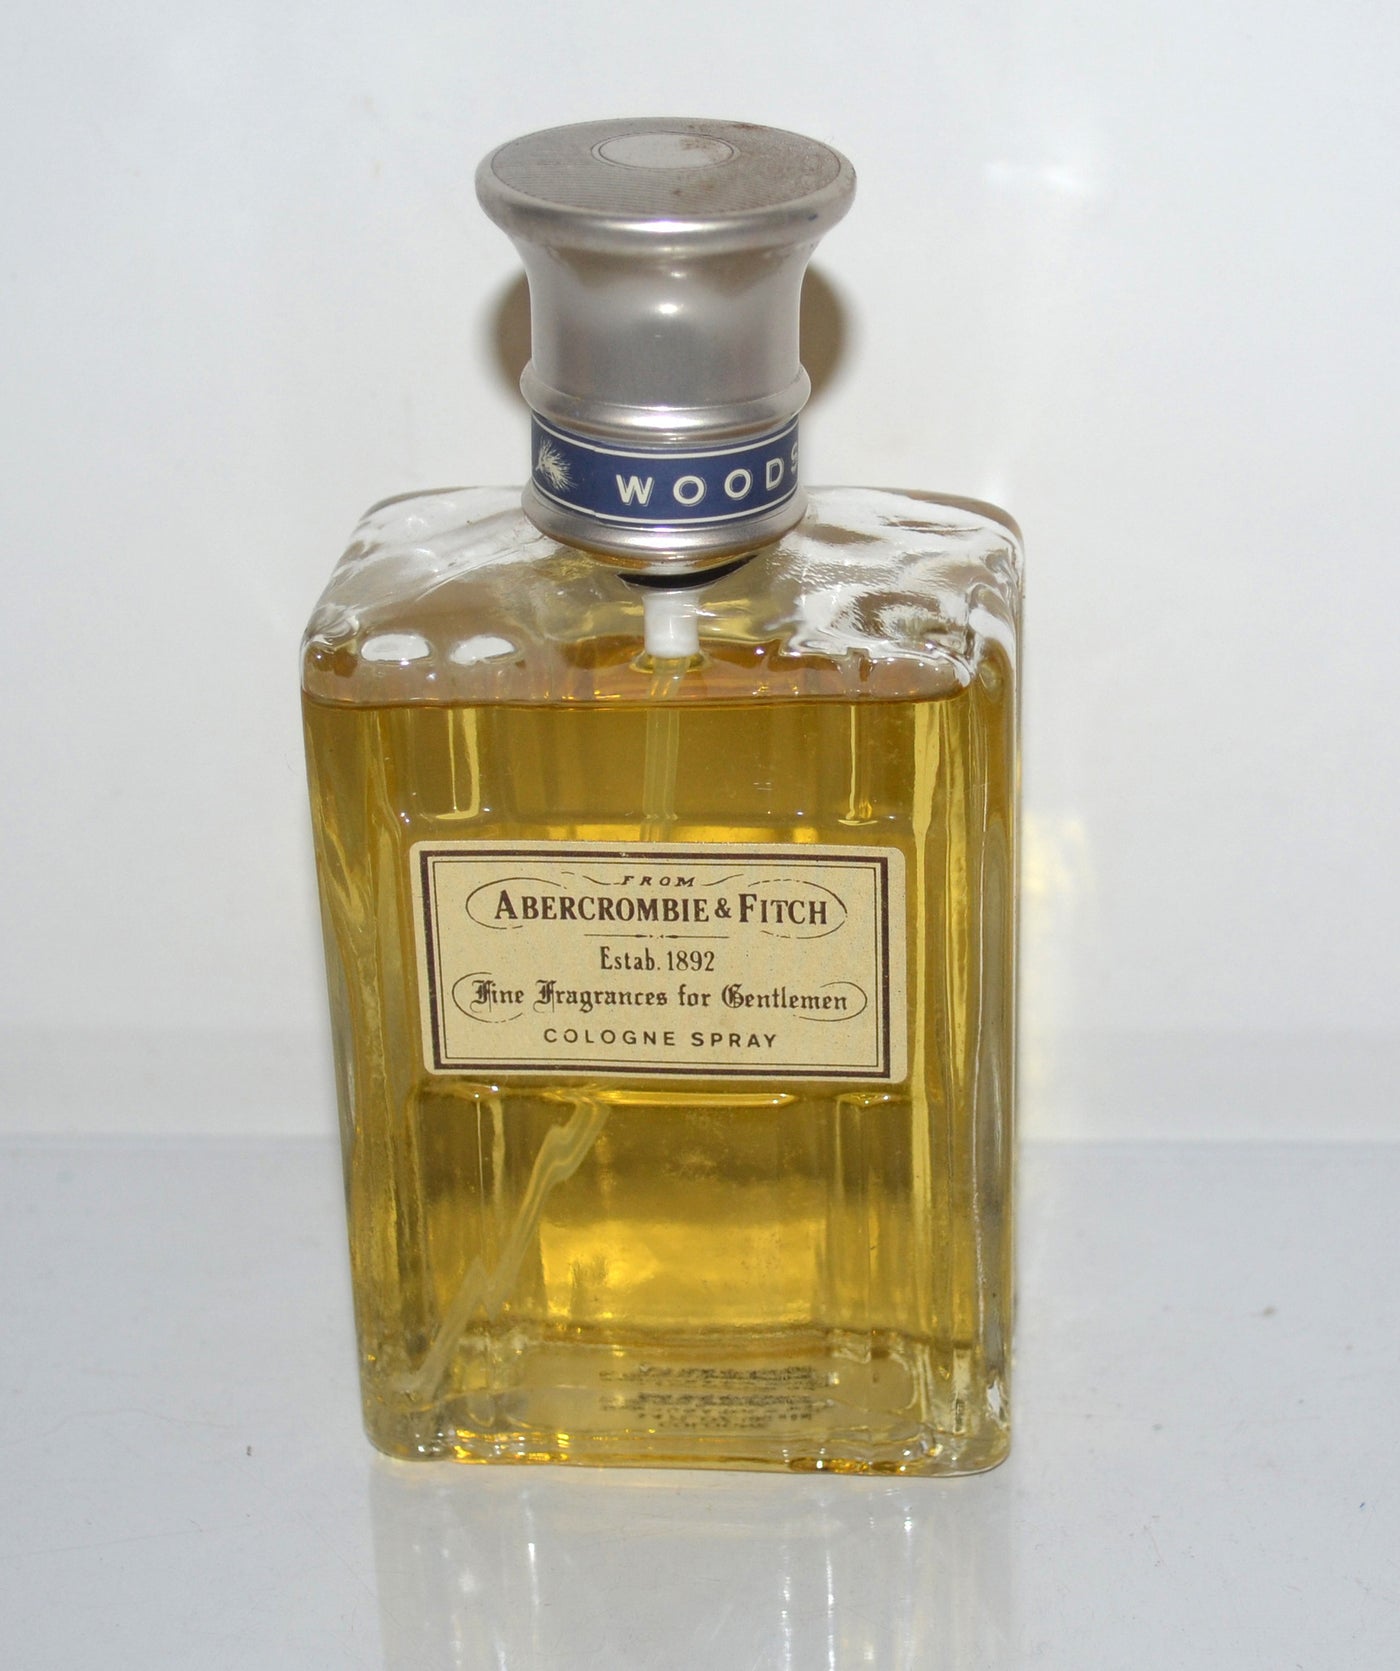 Abercrombie & Fitch Woods Cologne Spray